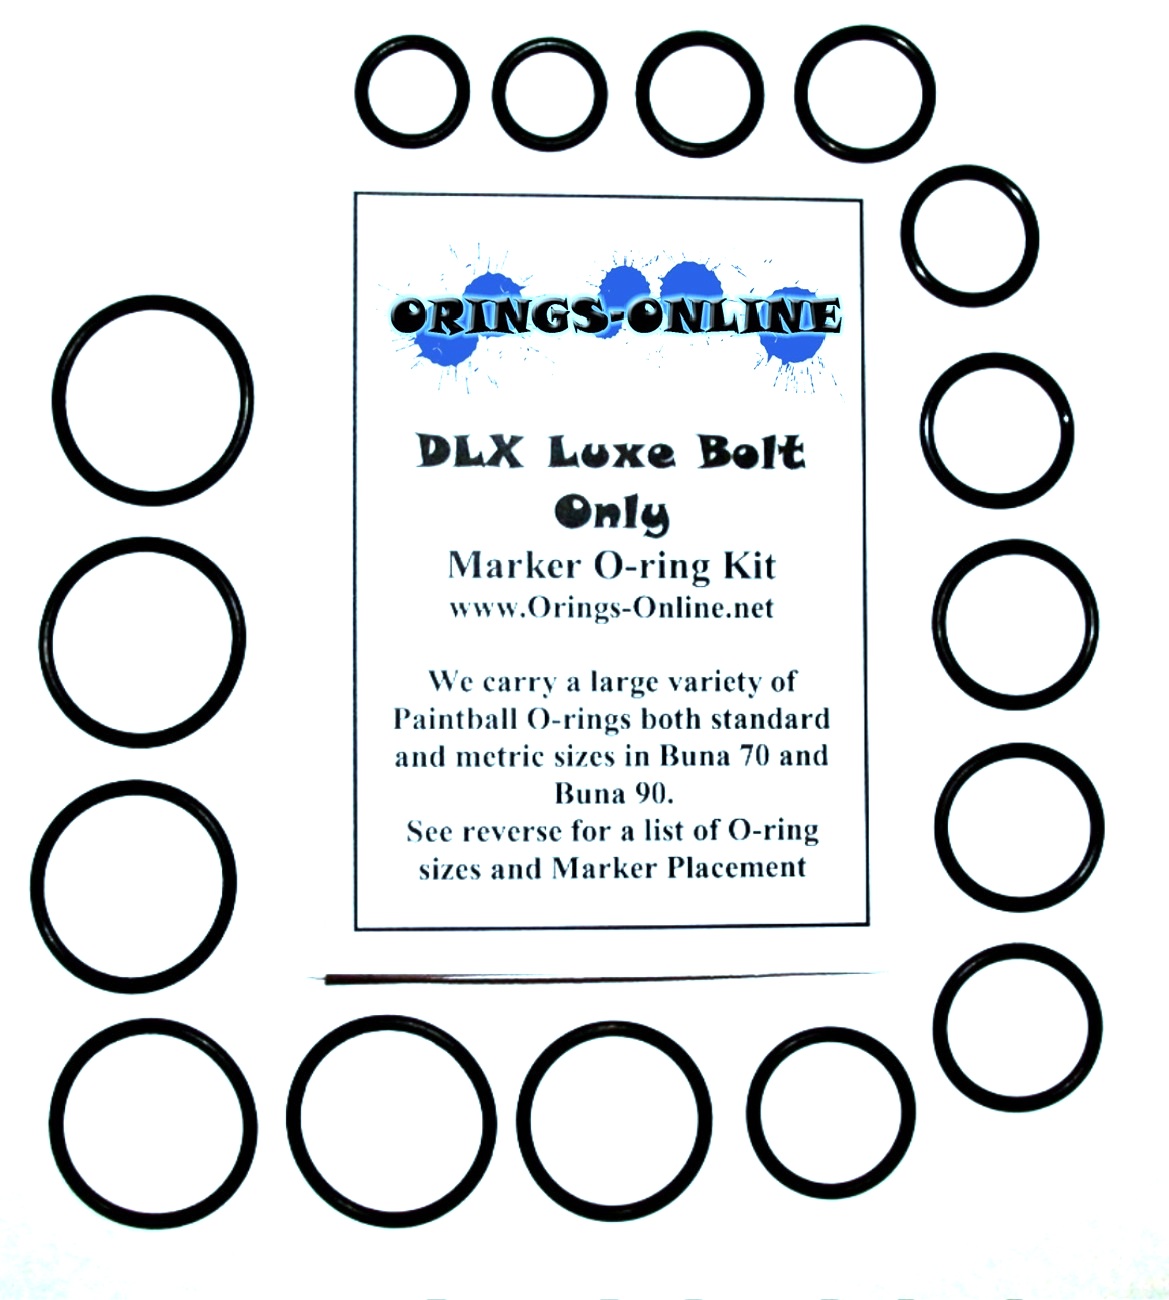 DLX Luxe Bolt Only Marker O-ring Kit